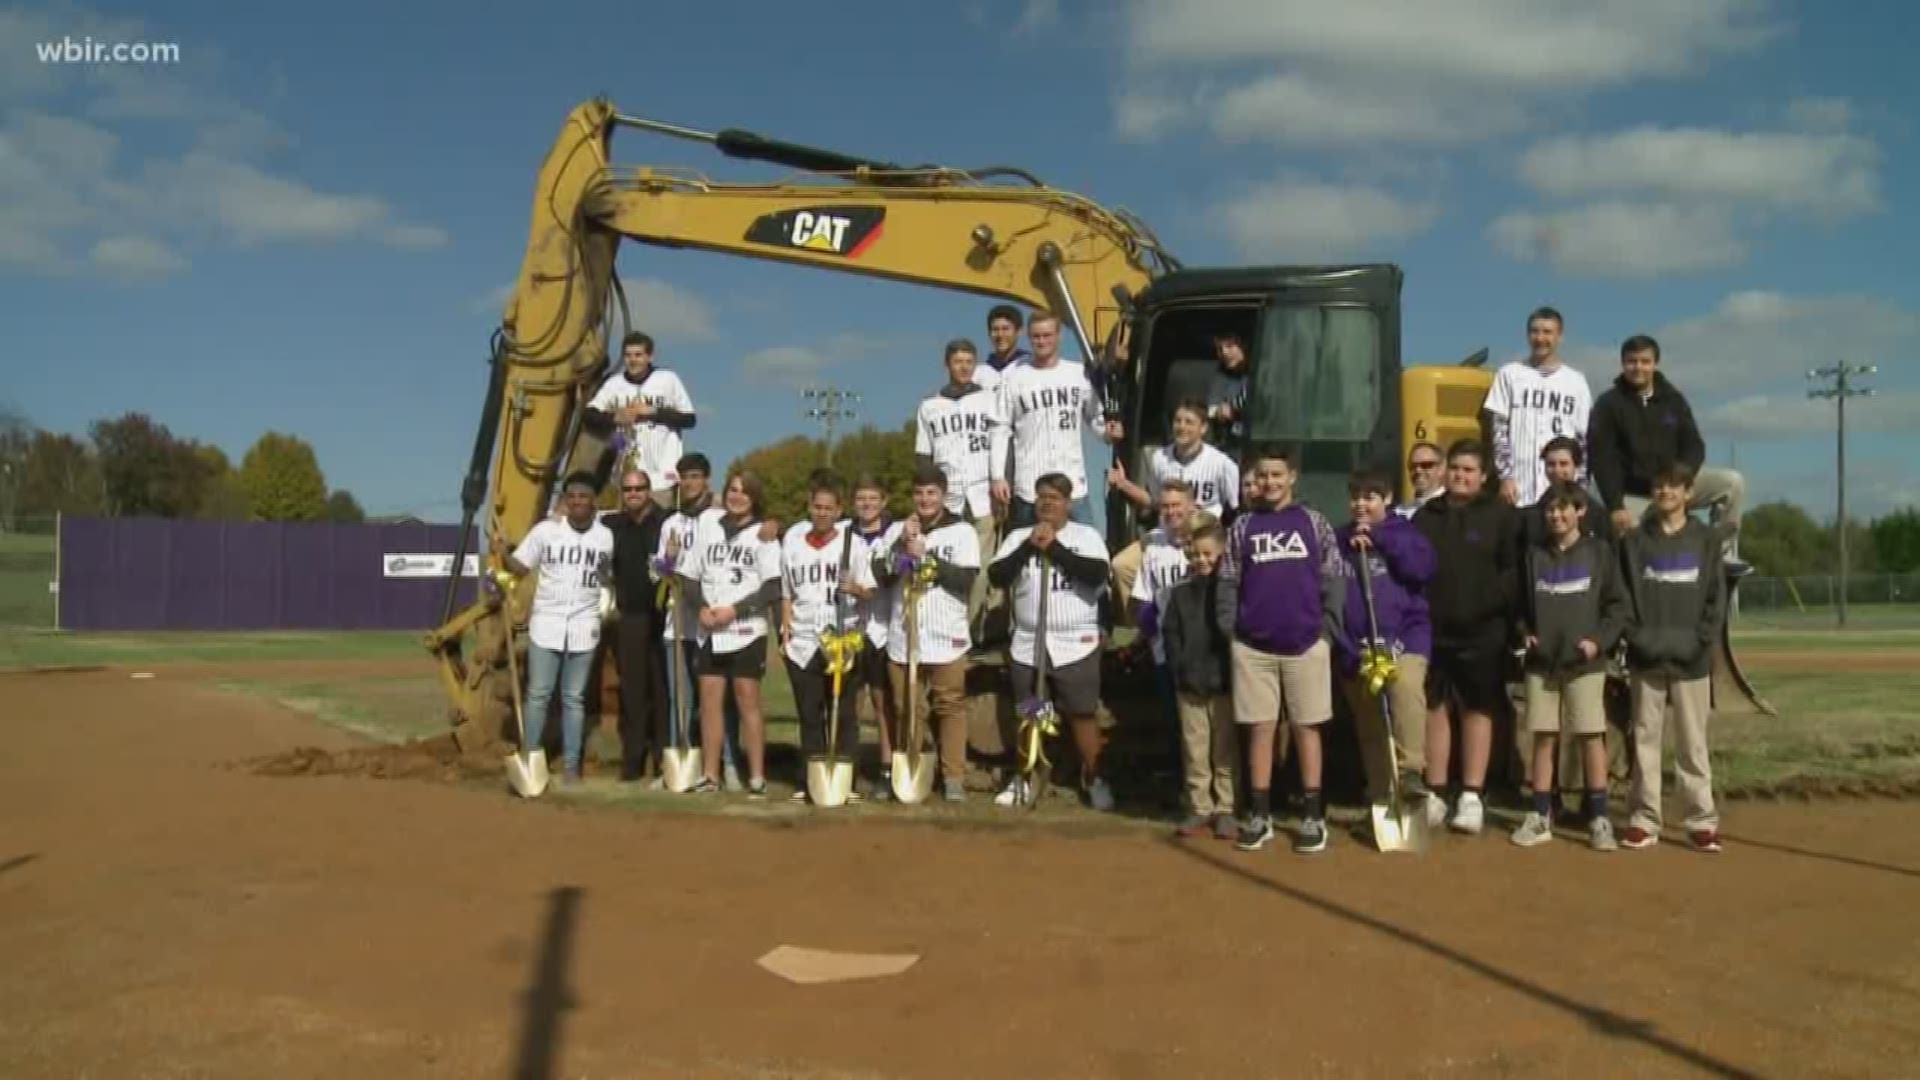 Crews began work on a new baseball field for The King's Academy in Seymour.